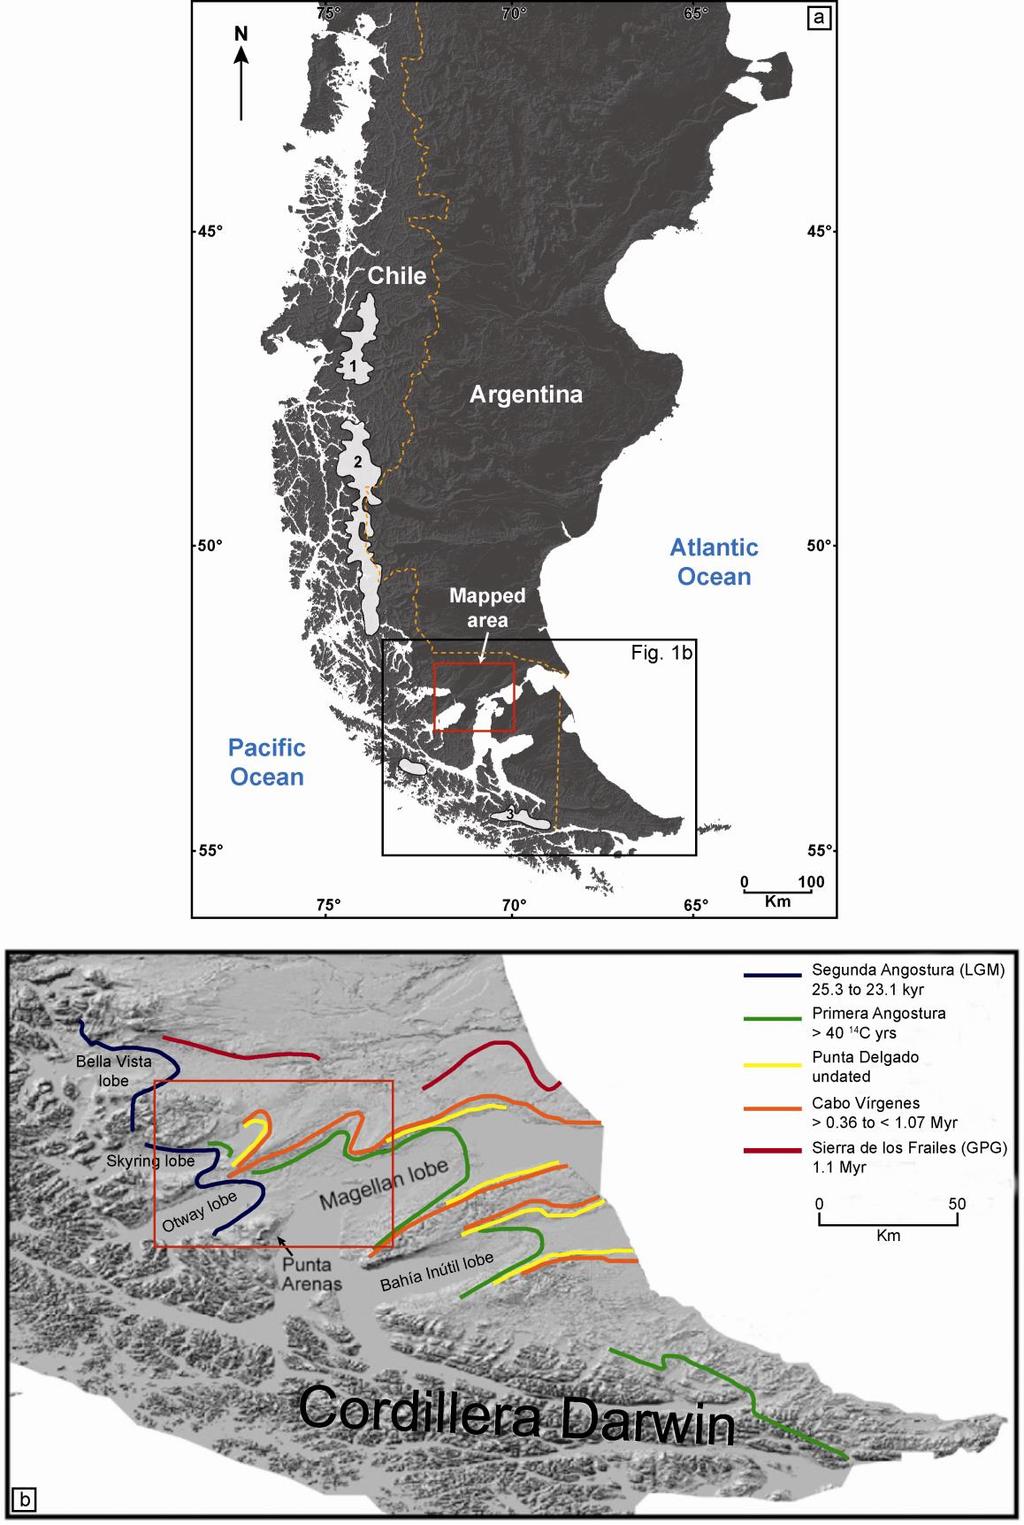 Figure 1 (a) Location of the mapped area in the Strait of Magellan region, southernmost Patagonia.